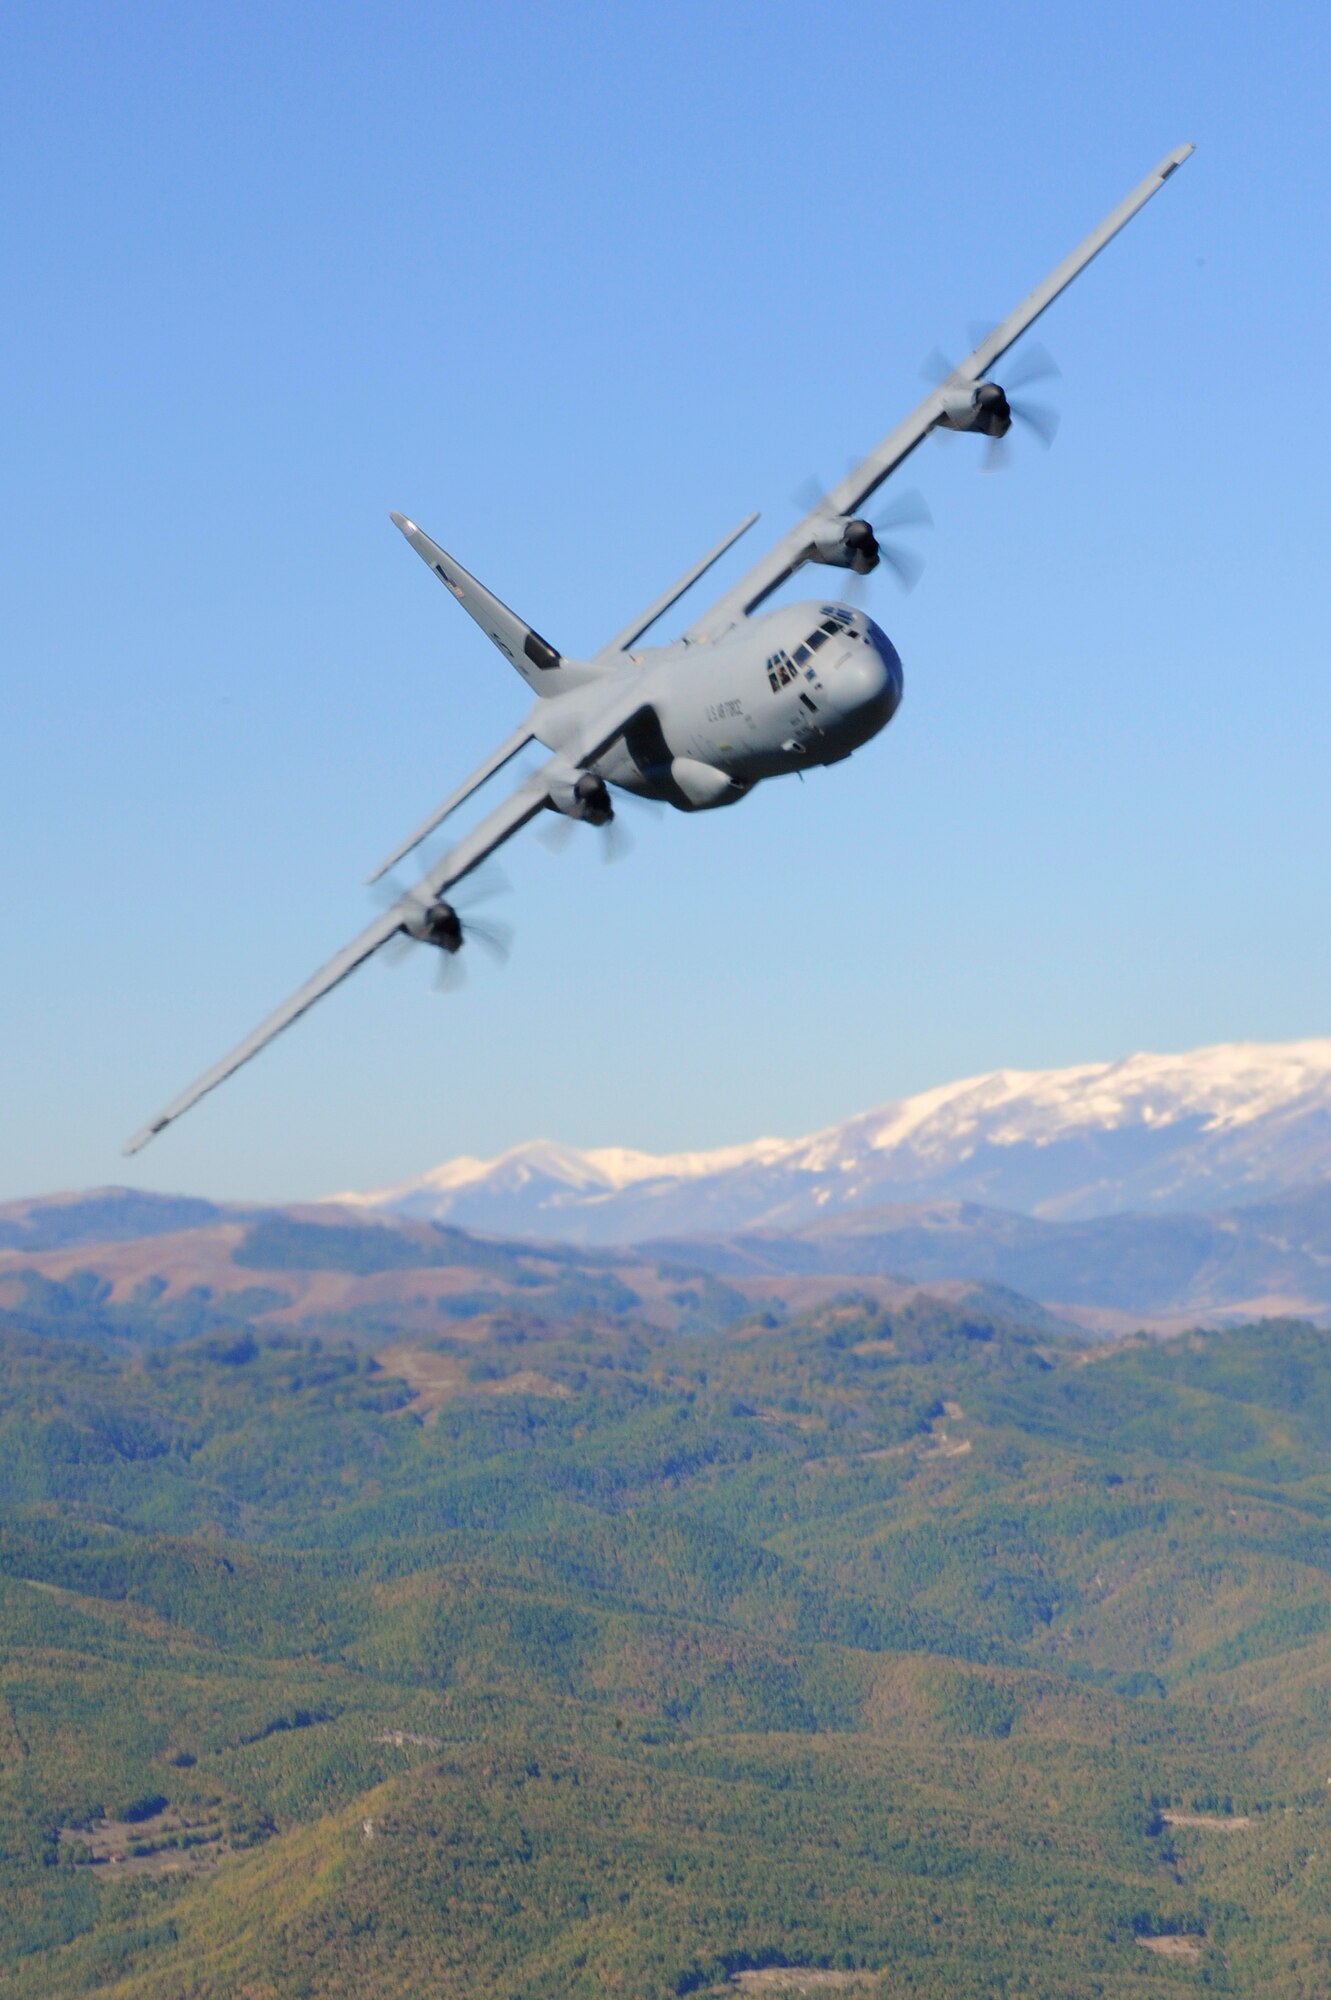 A C-130J Super Hercules assigned to the 37th Airlift Squadron, Ramstein Air Base, Germany, conducts low-level flight training during Operation Thracian Fall 2011, Oct. 19, 2011 in Plovdiv, Bulgaria. OTF11 is off-station training designed to enhance interoperability between U.S. and Bulgarian Air Forces as well as build partnerships with paratroopers from both. (U.S. Air Force photo by Senior Airman Stephen J. Otero)